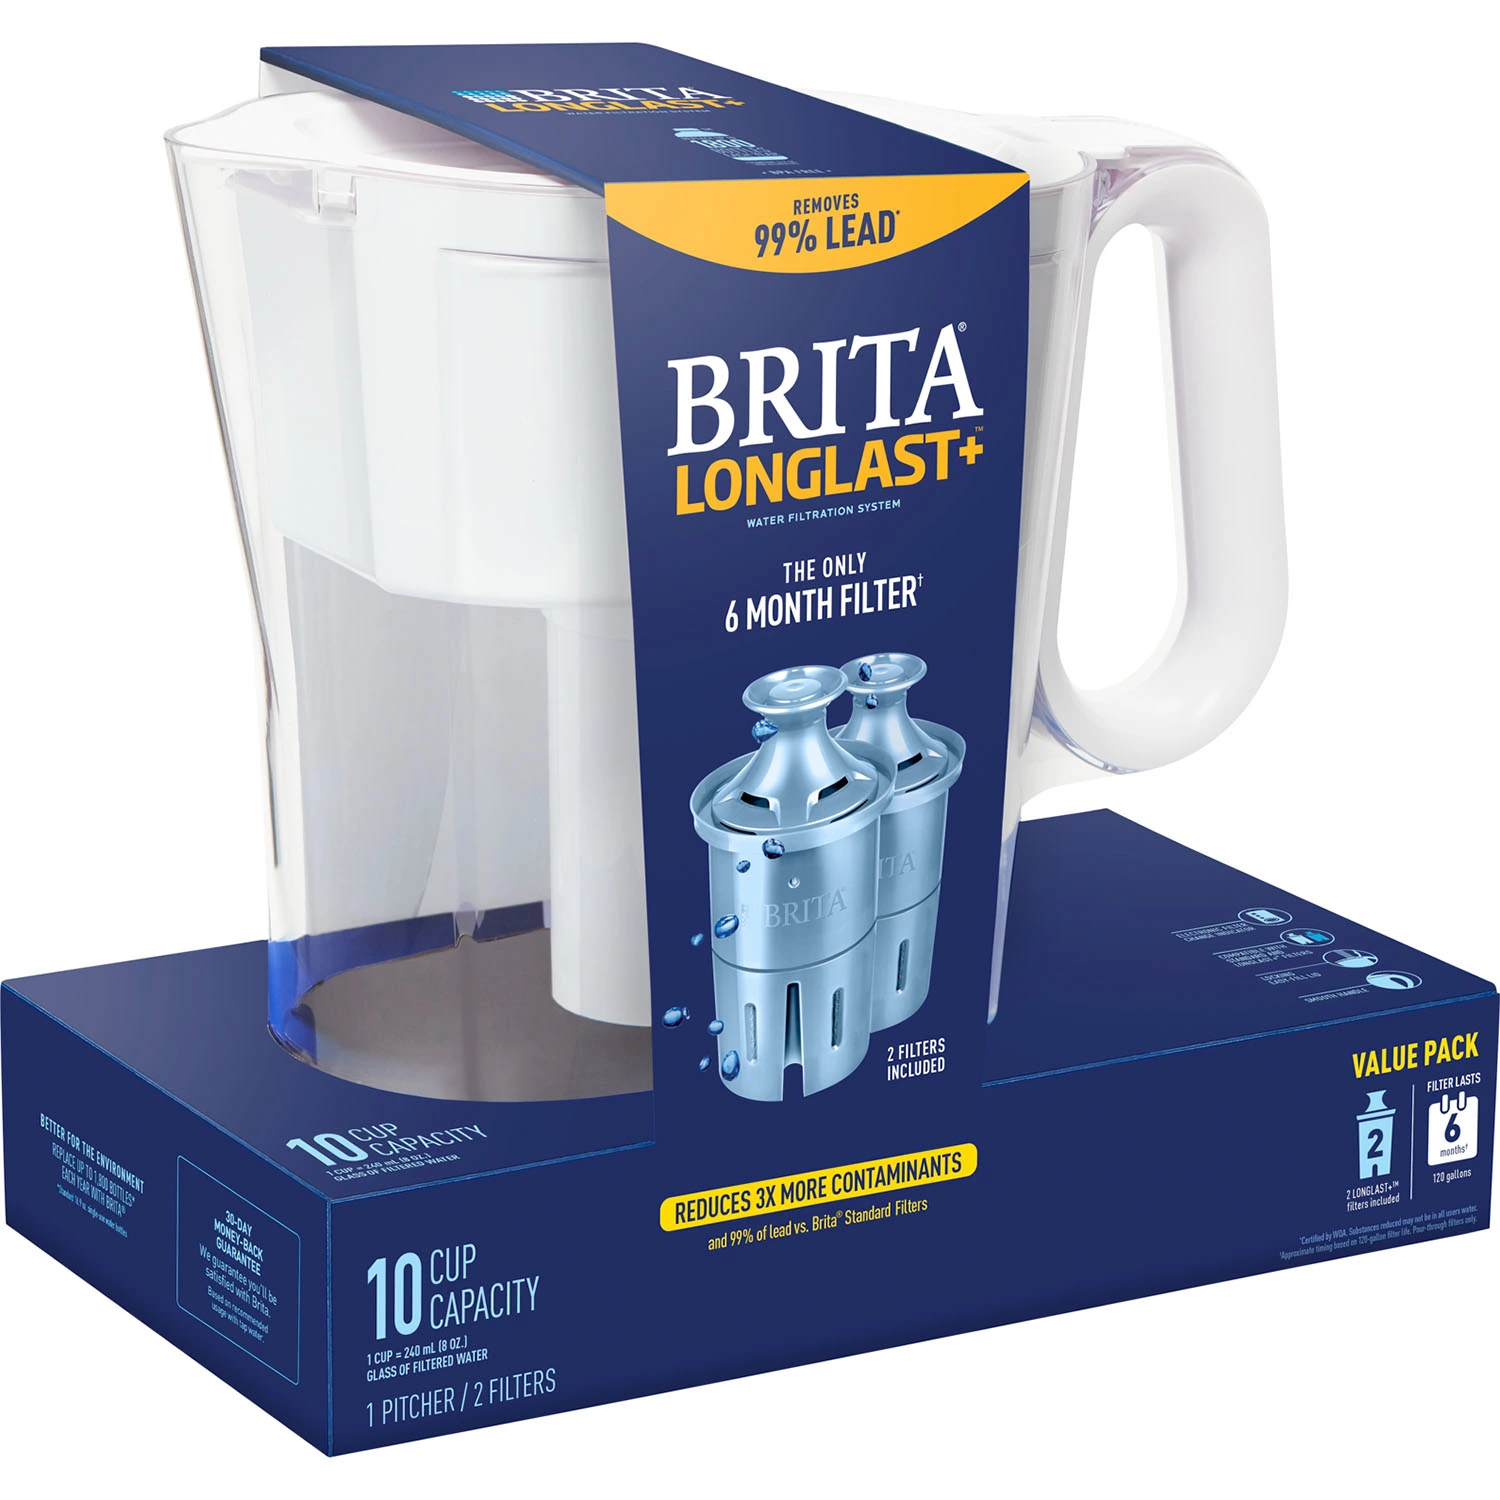 https://bigbigmart.com/wp-content/uploads/2022/07/Brita-Large-10-Cup-Water-Filter-Pitcher-with-2-Longlast-Filters-Wave-White6.webp